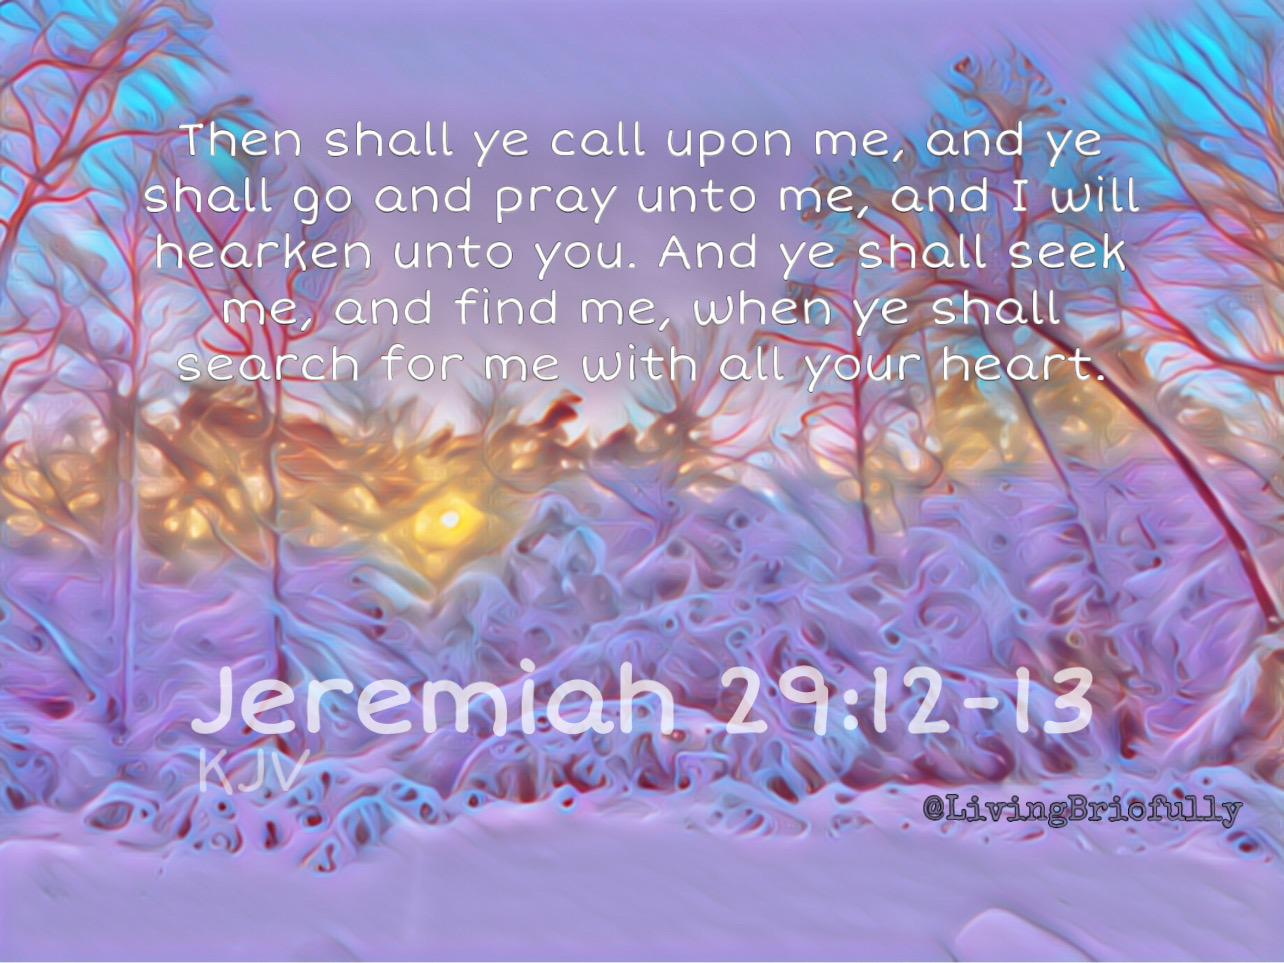 "Then shall ye call upon me, and ye shall go and pray unto me, and I will hearken unto you. And ye shall seek me, and find me, when ye shall search for me with all your heart." Jeremiah 29:12-13 KJV